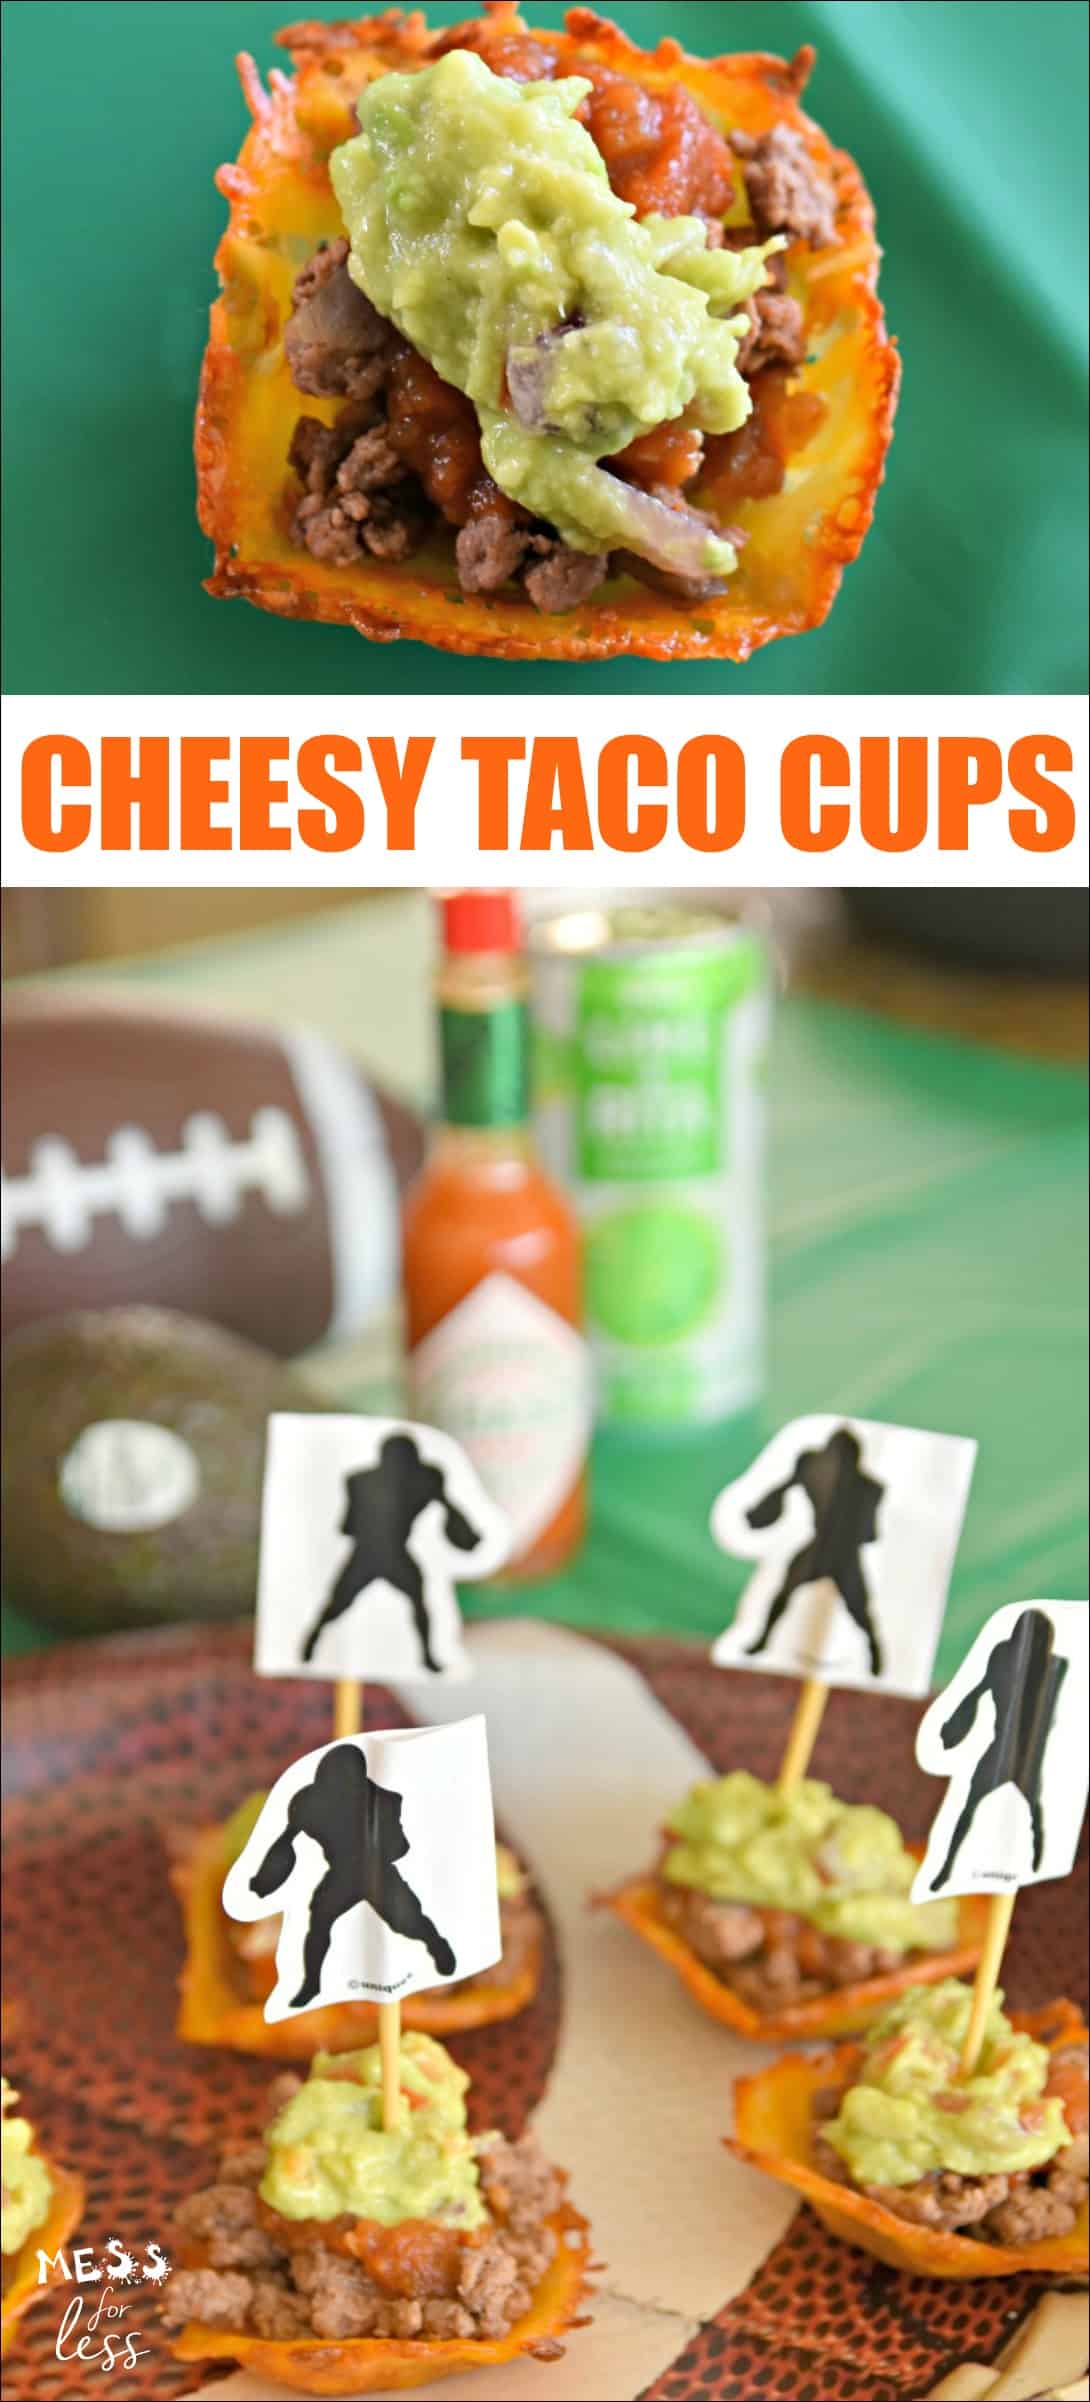 #ad These Cheesy Taco Cups with Guacamole are perfect to enjoy while watching the Big Game! Click here to get the recipe: https://www.messforless.net/cheesy-taco-cups-with-guacamole/ #SavorWinningFlavors #AvocadosFromMexico #HAVEARITA #FlavorYourWorld